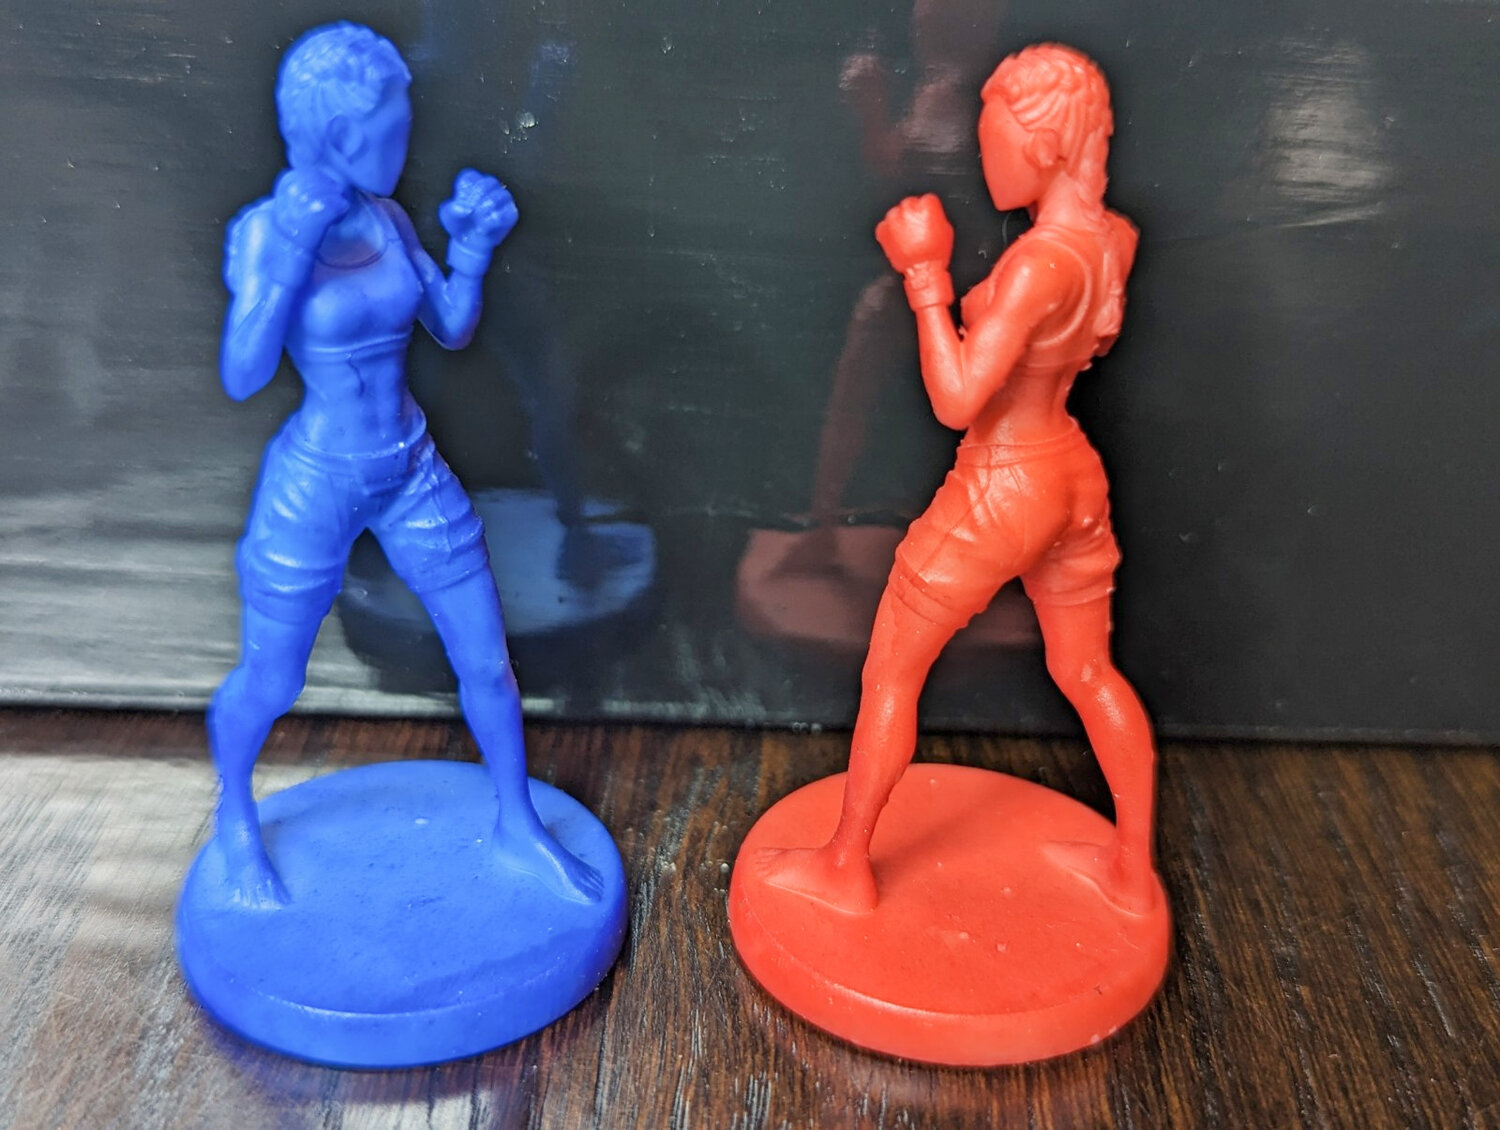 Caged In is bringing mixed martial arts to the world of board games and grows into crowfunding on GameFound.com on Wednesday, March 29. Pictured is the player pieces.